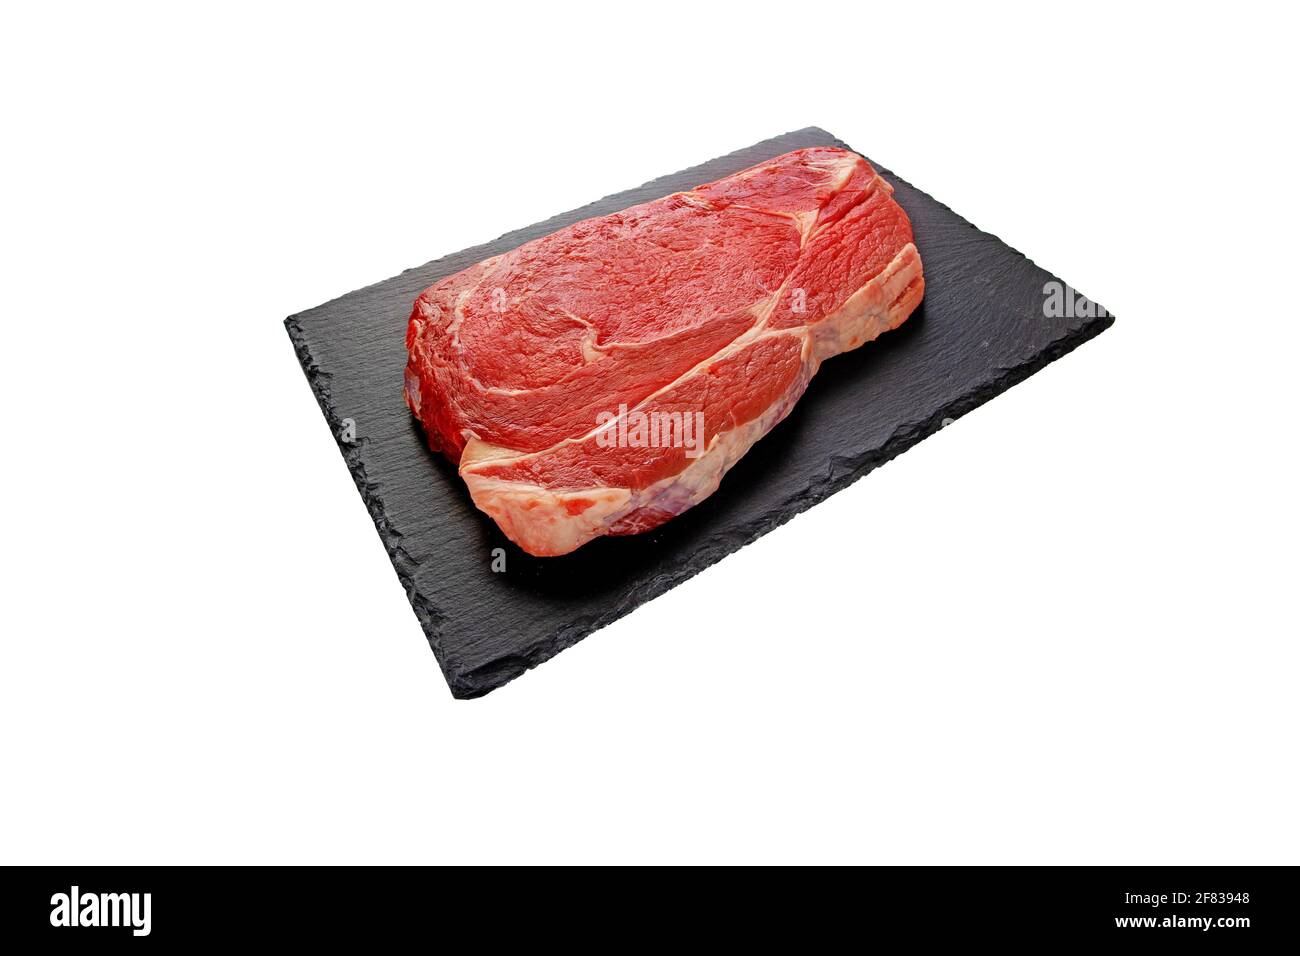 Juicy raw meat cut. Beef entrecote slice on the black textured slate plate isolated on white. Stock Photo